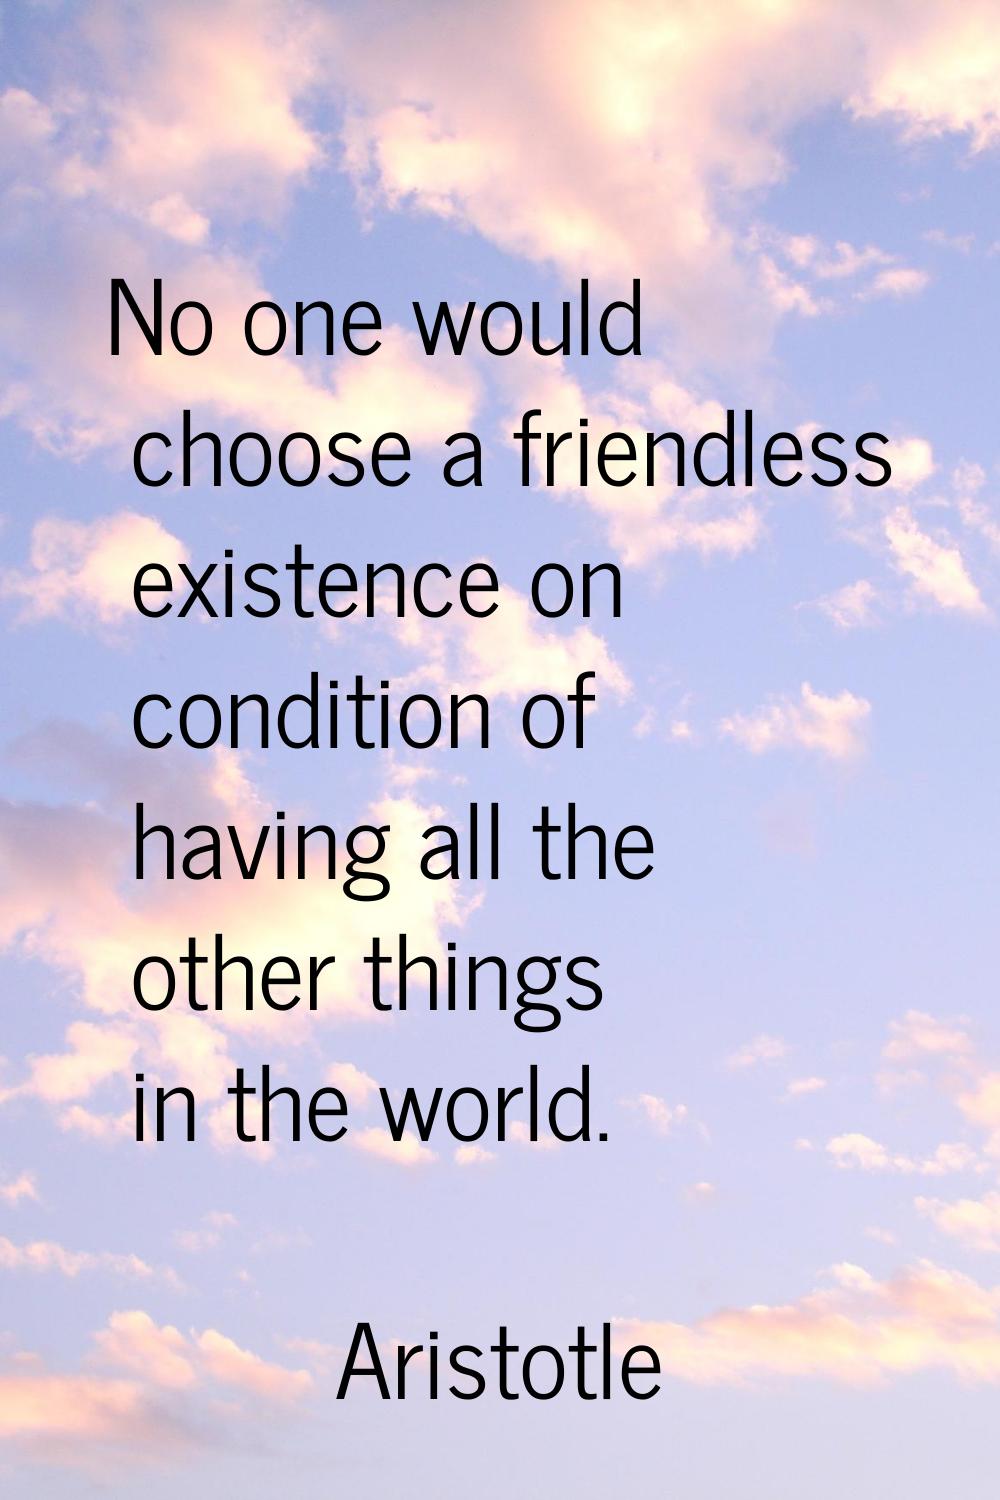 No one would choose a friendless existence on condition of having all the other things in the world